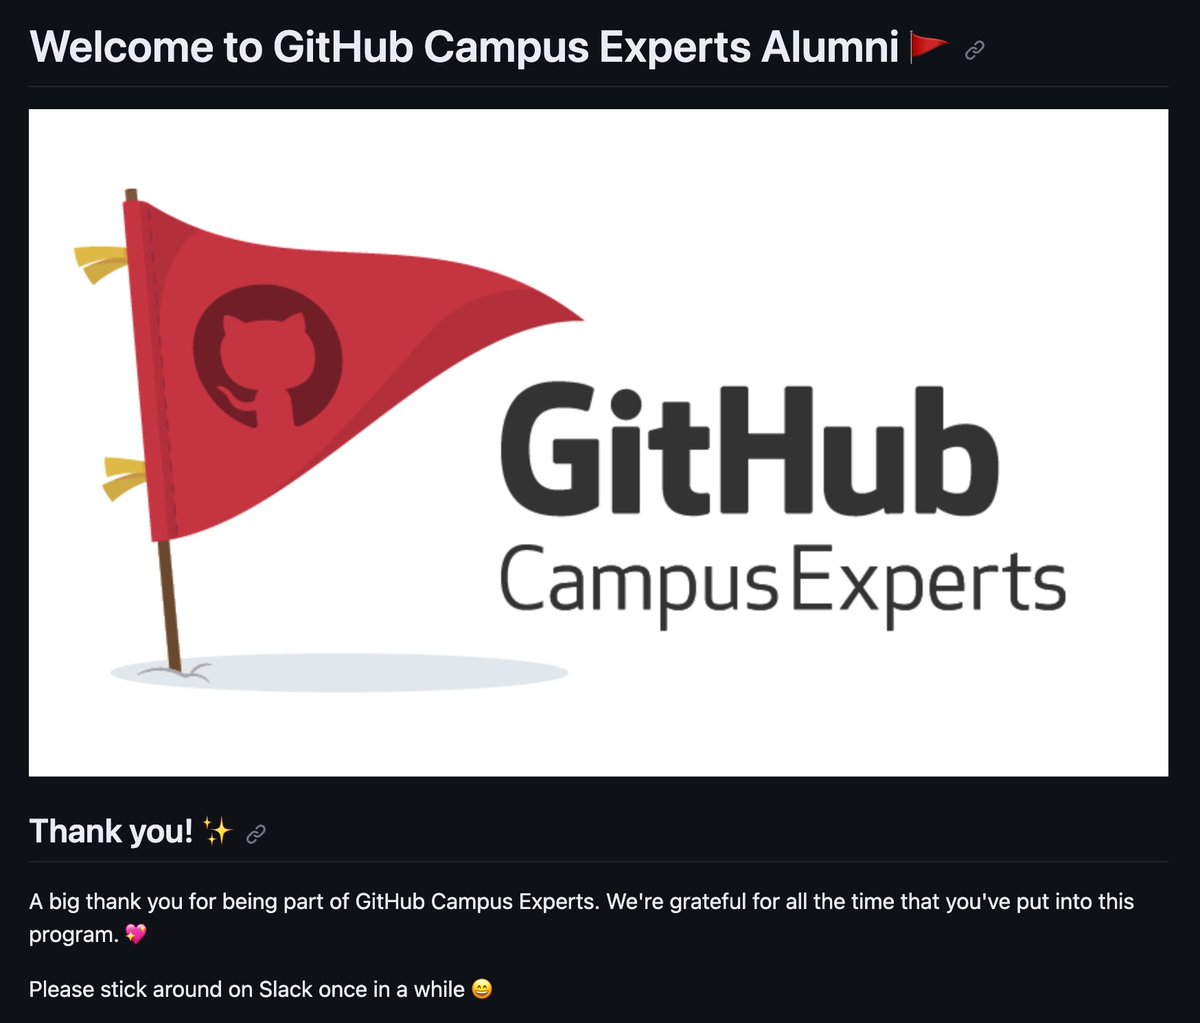 All good things must come to an end!
It was one hell of a run 🤩. Forever grateful to @GitHubEducation , to it's amazing staff, especially @juanpflores_ and @lasr21 and to the amazing bunch of GCEs for everything 💖 May we meet again someday! 🚩